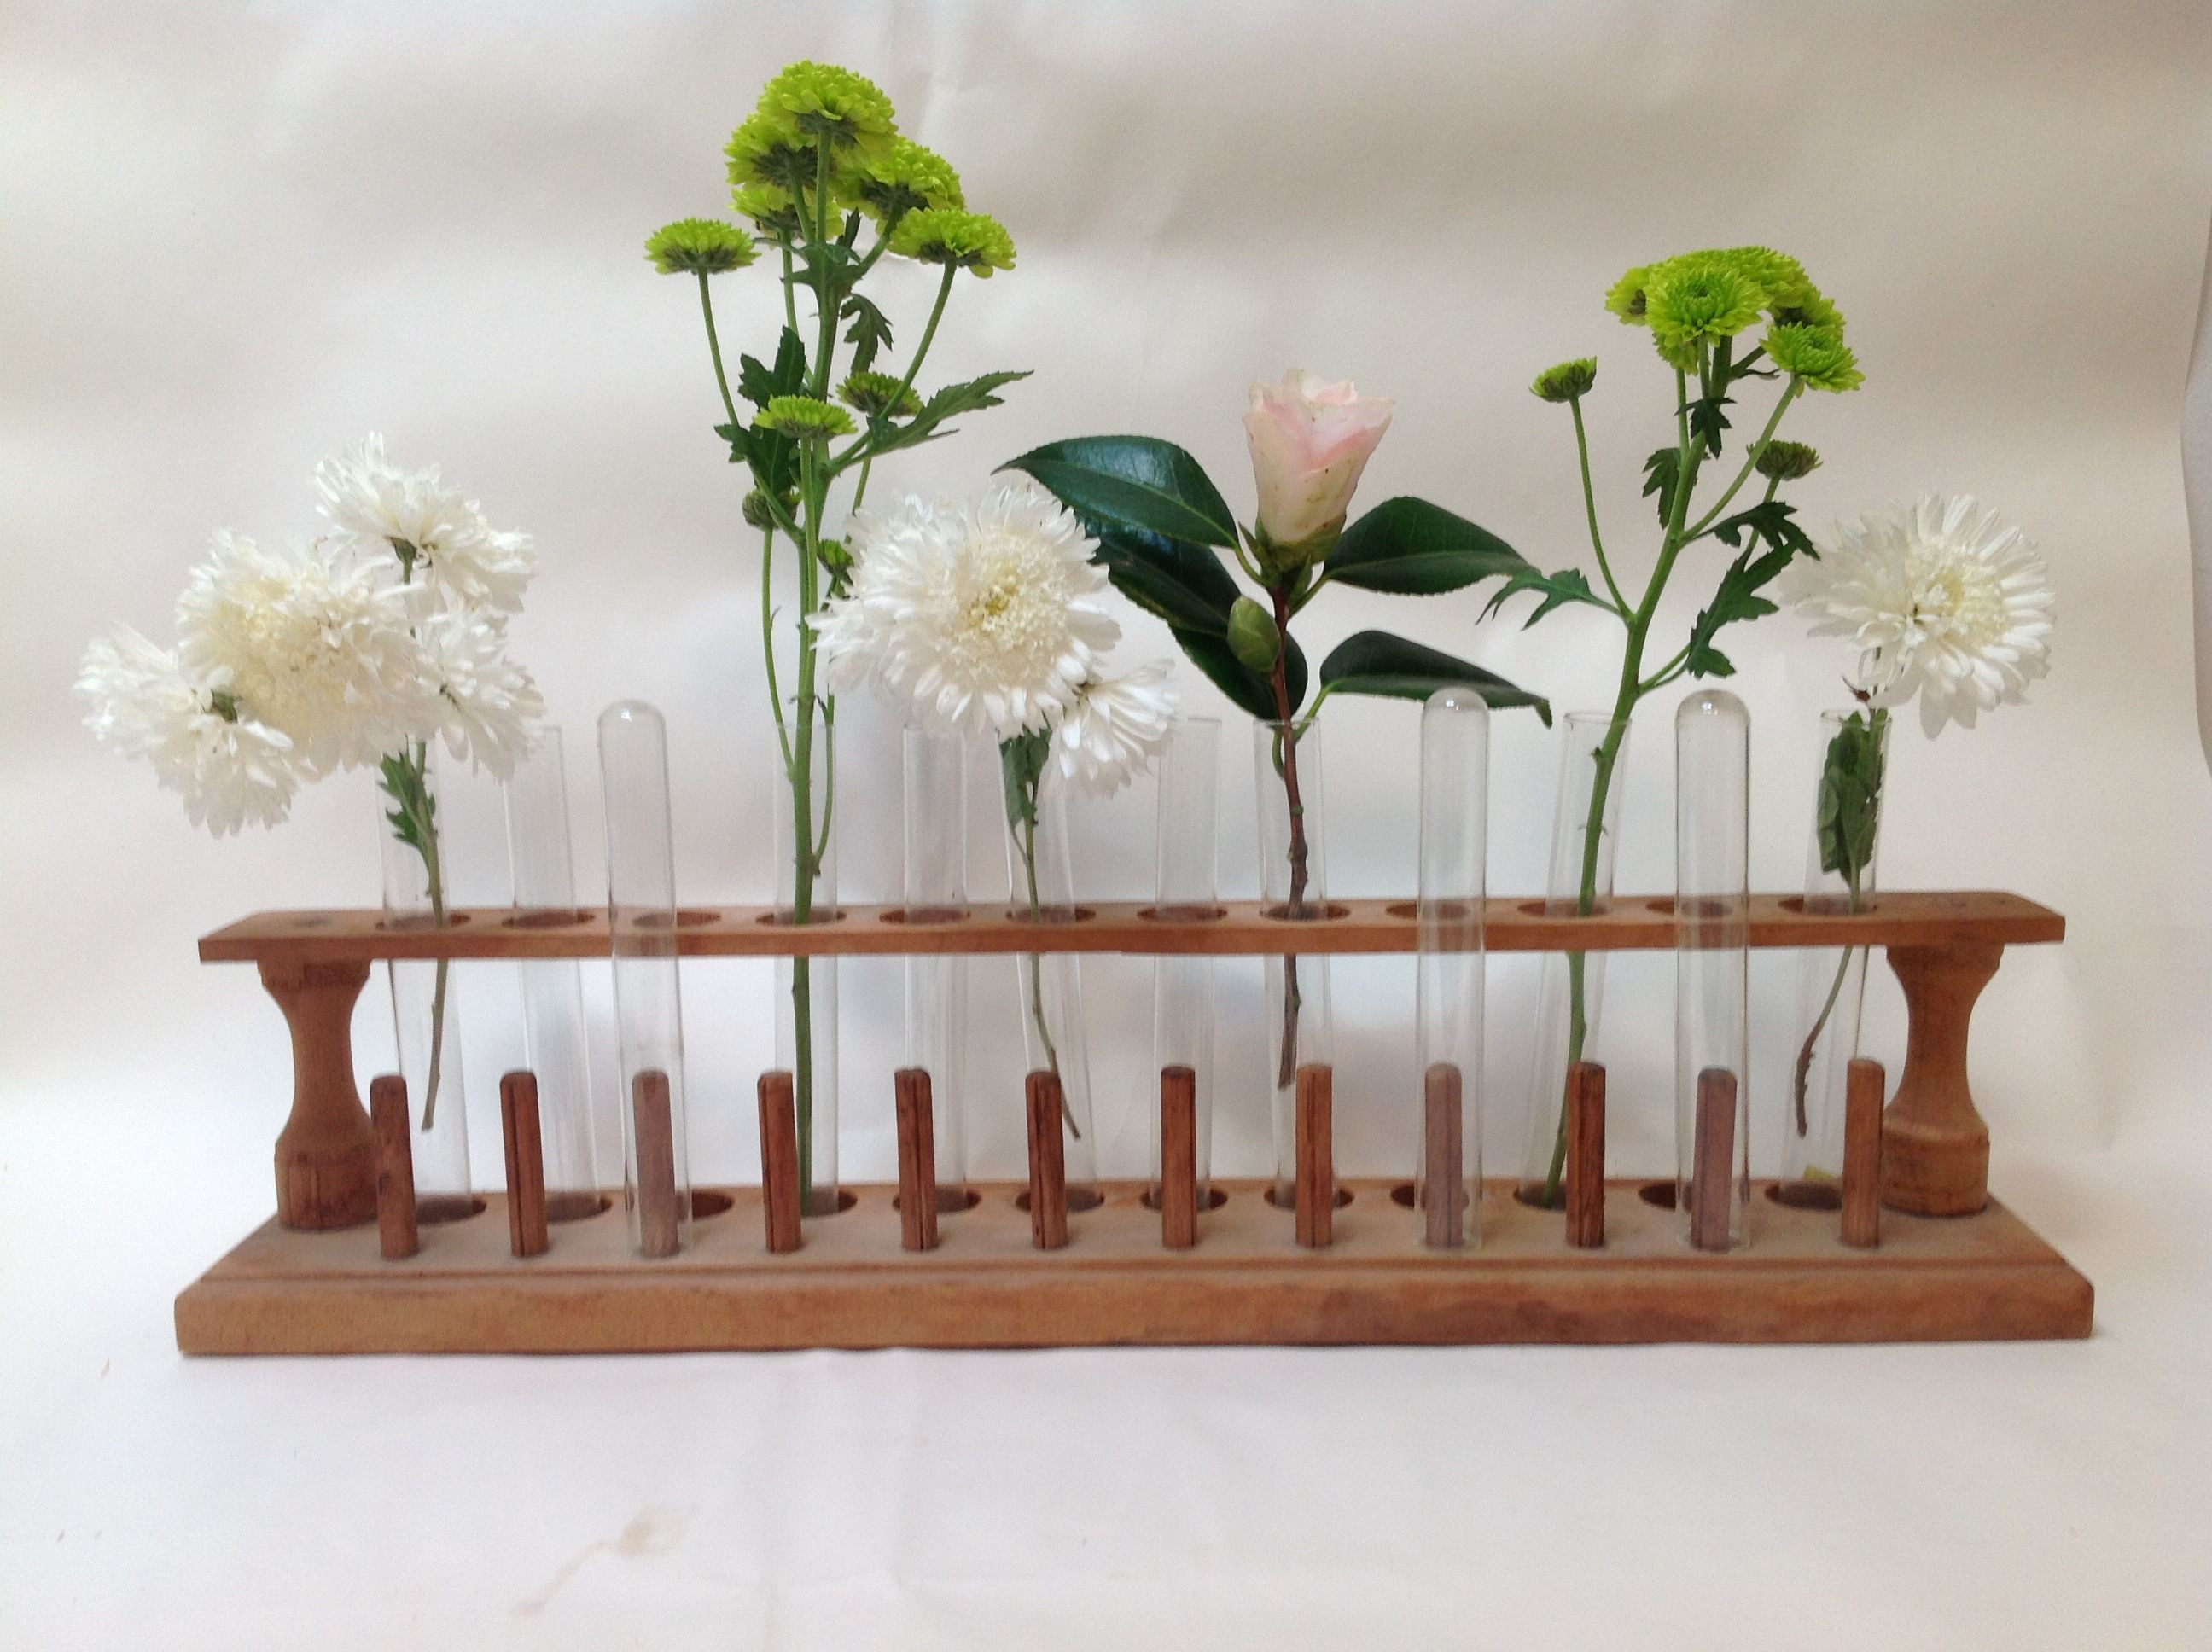 13 Wonderful Glass Test Tube Vases 2024 free download glass test tube vases of vintage test tubes vase and flowers www thehuntereclectic com the within vintage test tubes vase and flowers www thehuntereclectic com